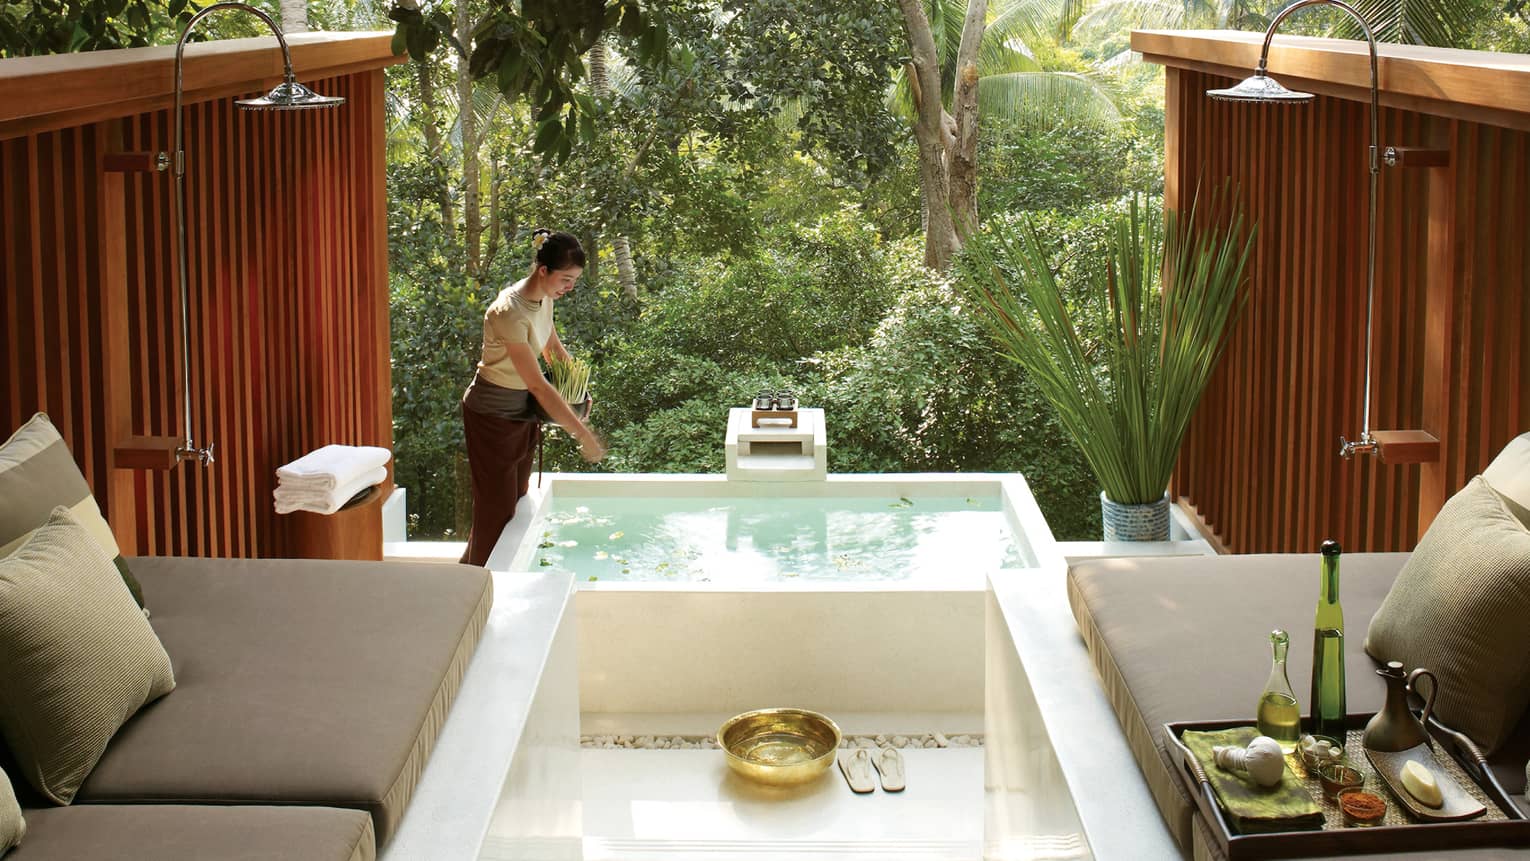 Plush cushioned benches around spa tub on outdoor patio